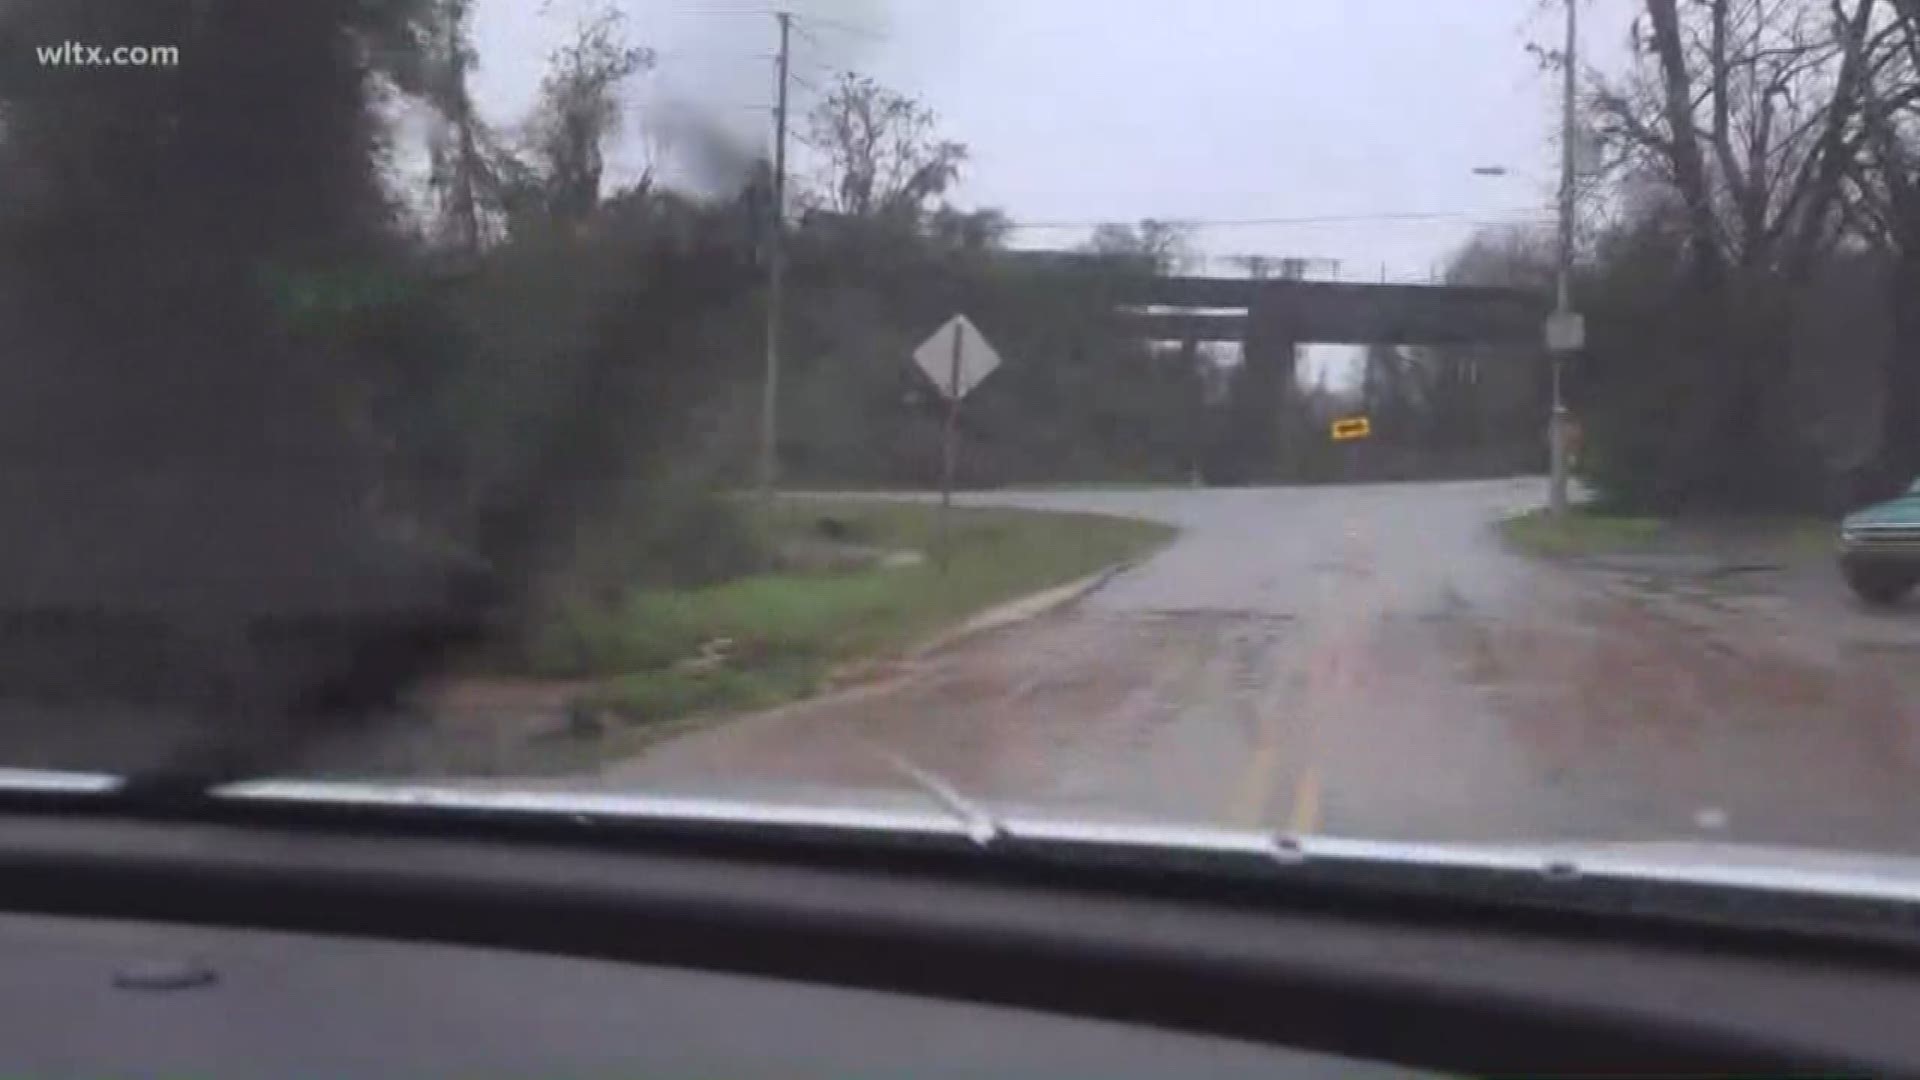 Flooded roads are beginning to clear in Newberry